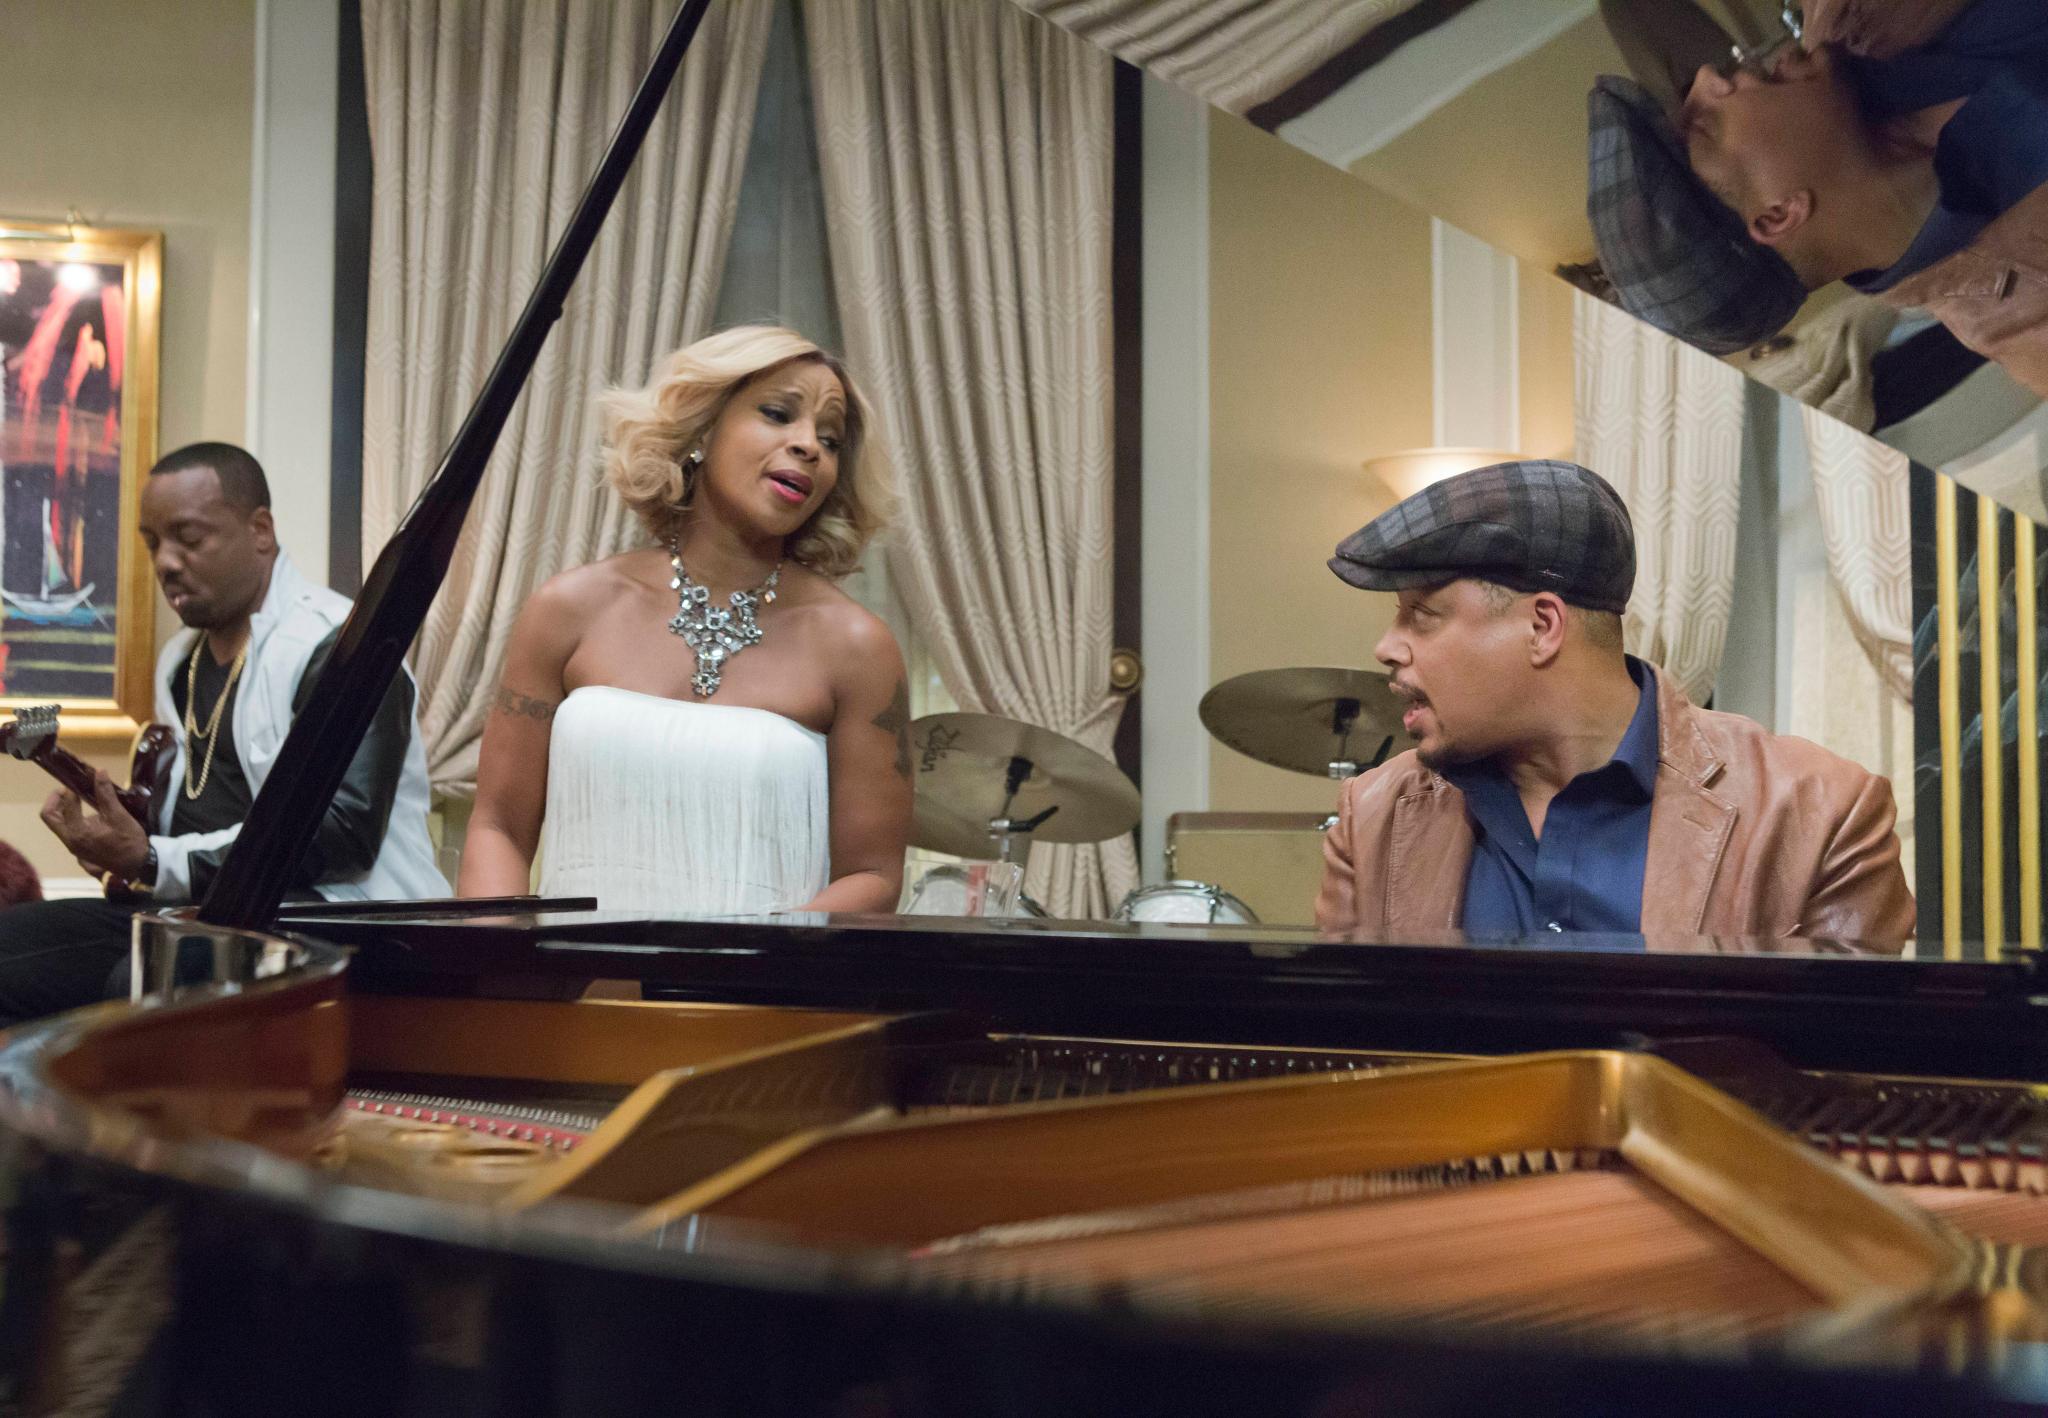 Your Ultimate Guide to 'Empire's' Season One Cameos
